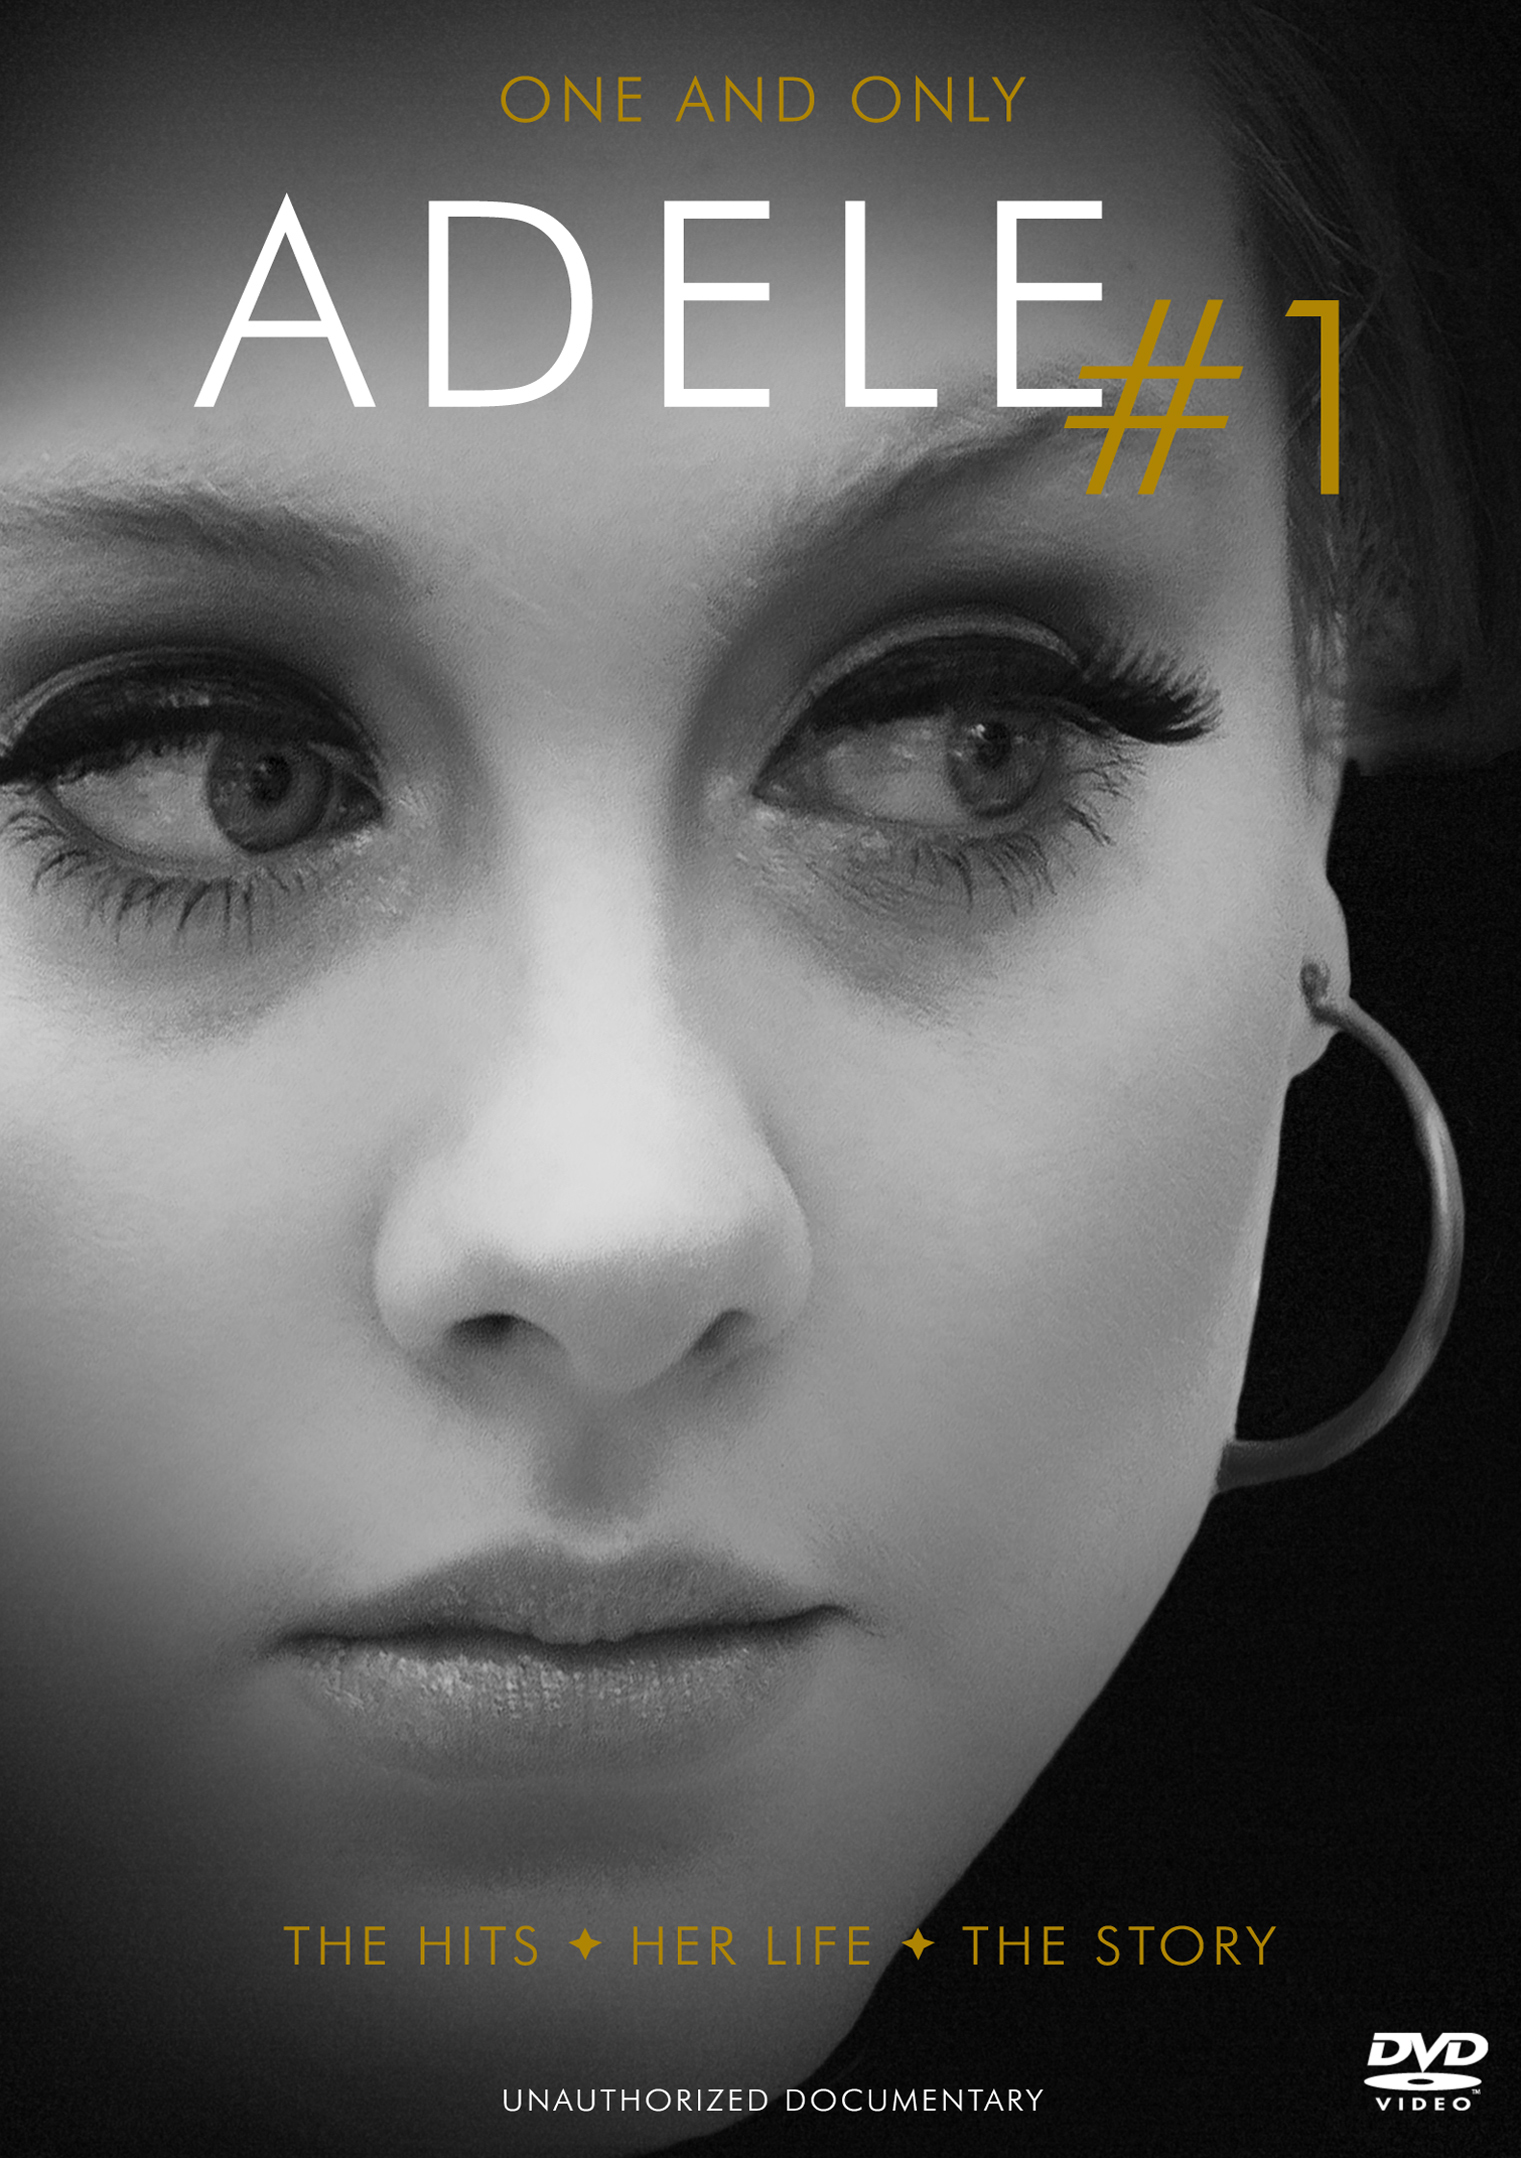 Adele - One And Only: Unauthorized - MVD Entertainment Group B2B